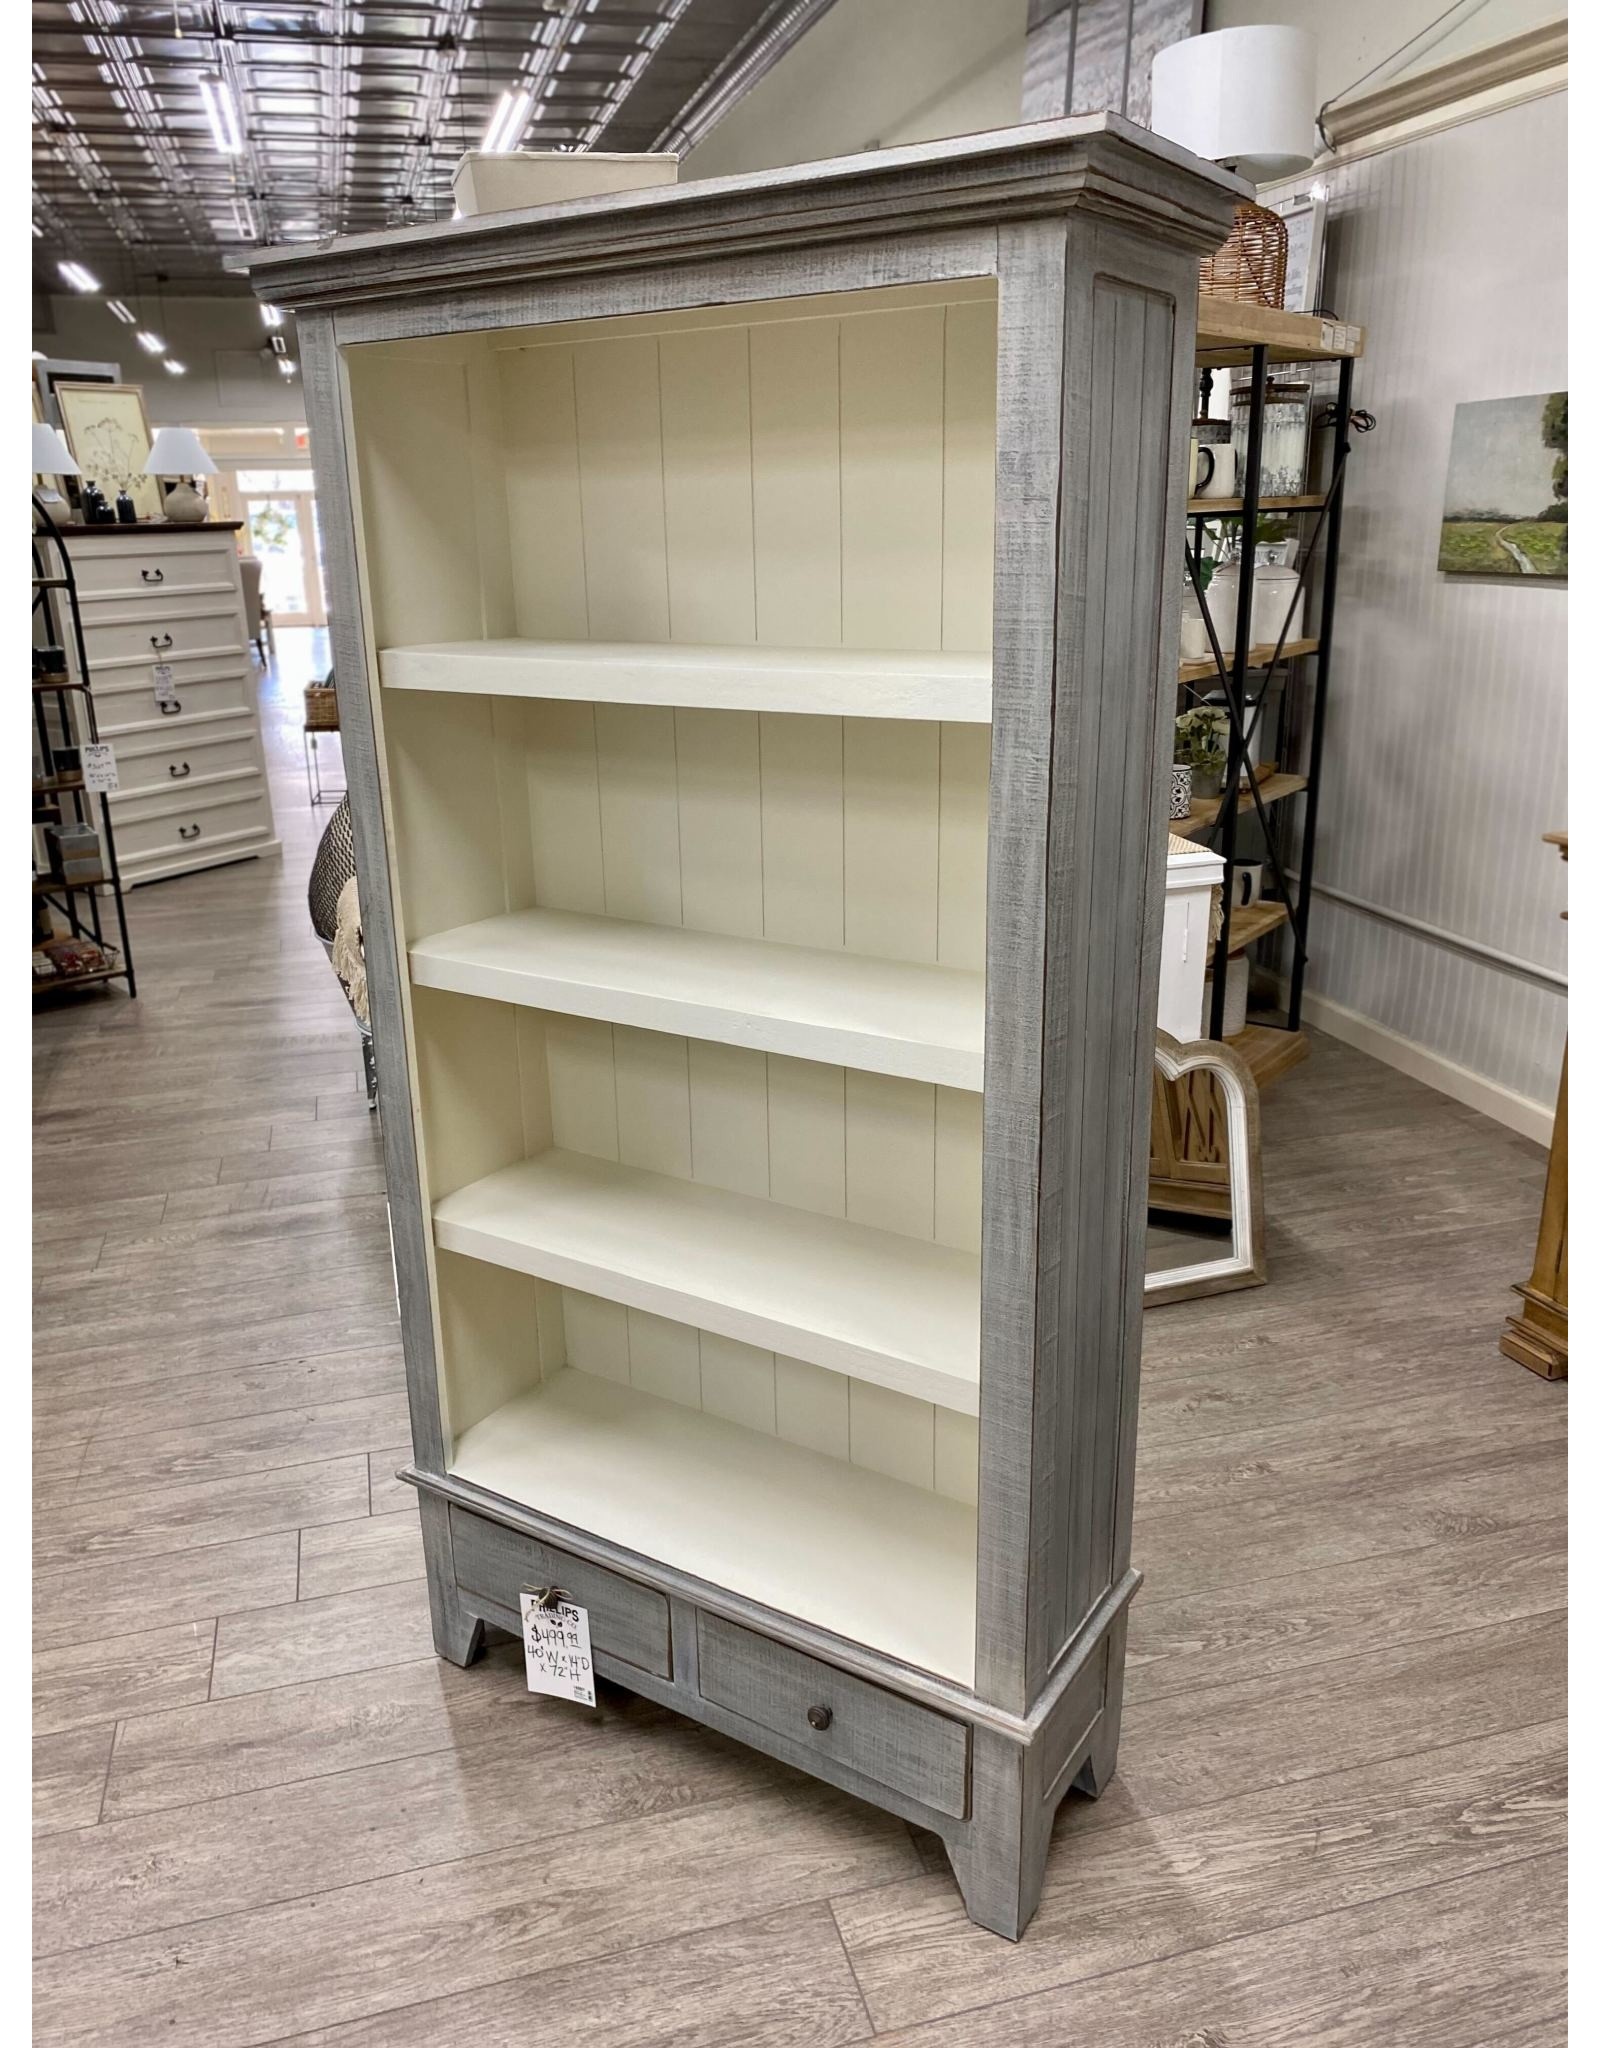 BKCS-72" BOOKCASE 40 × 14 × 72 in